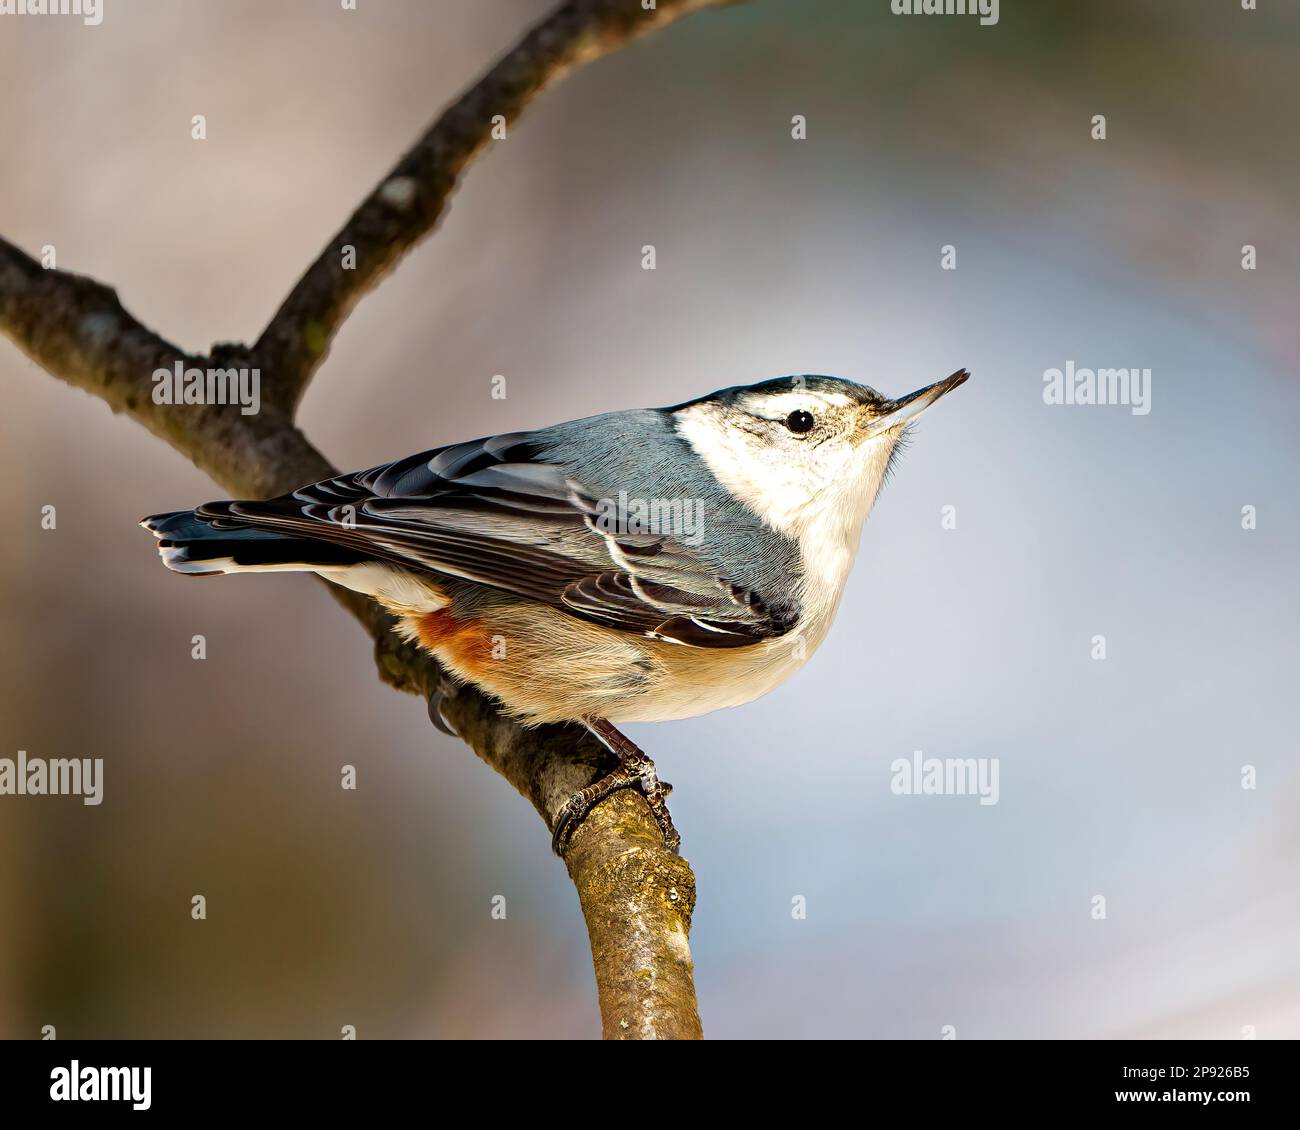 White-breasted Nuthatch side view perched on a tree branch with a blur background in its environment and habitat surrounding. Nuthatch Portrait. Stock Photo